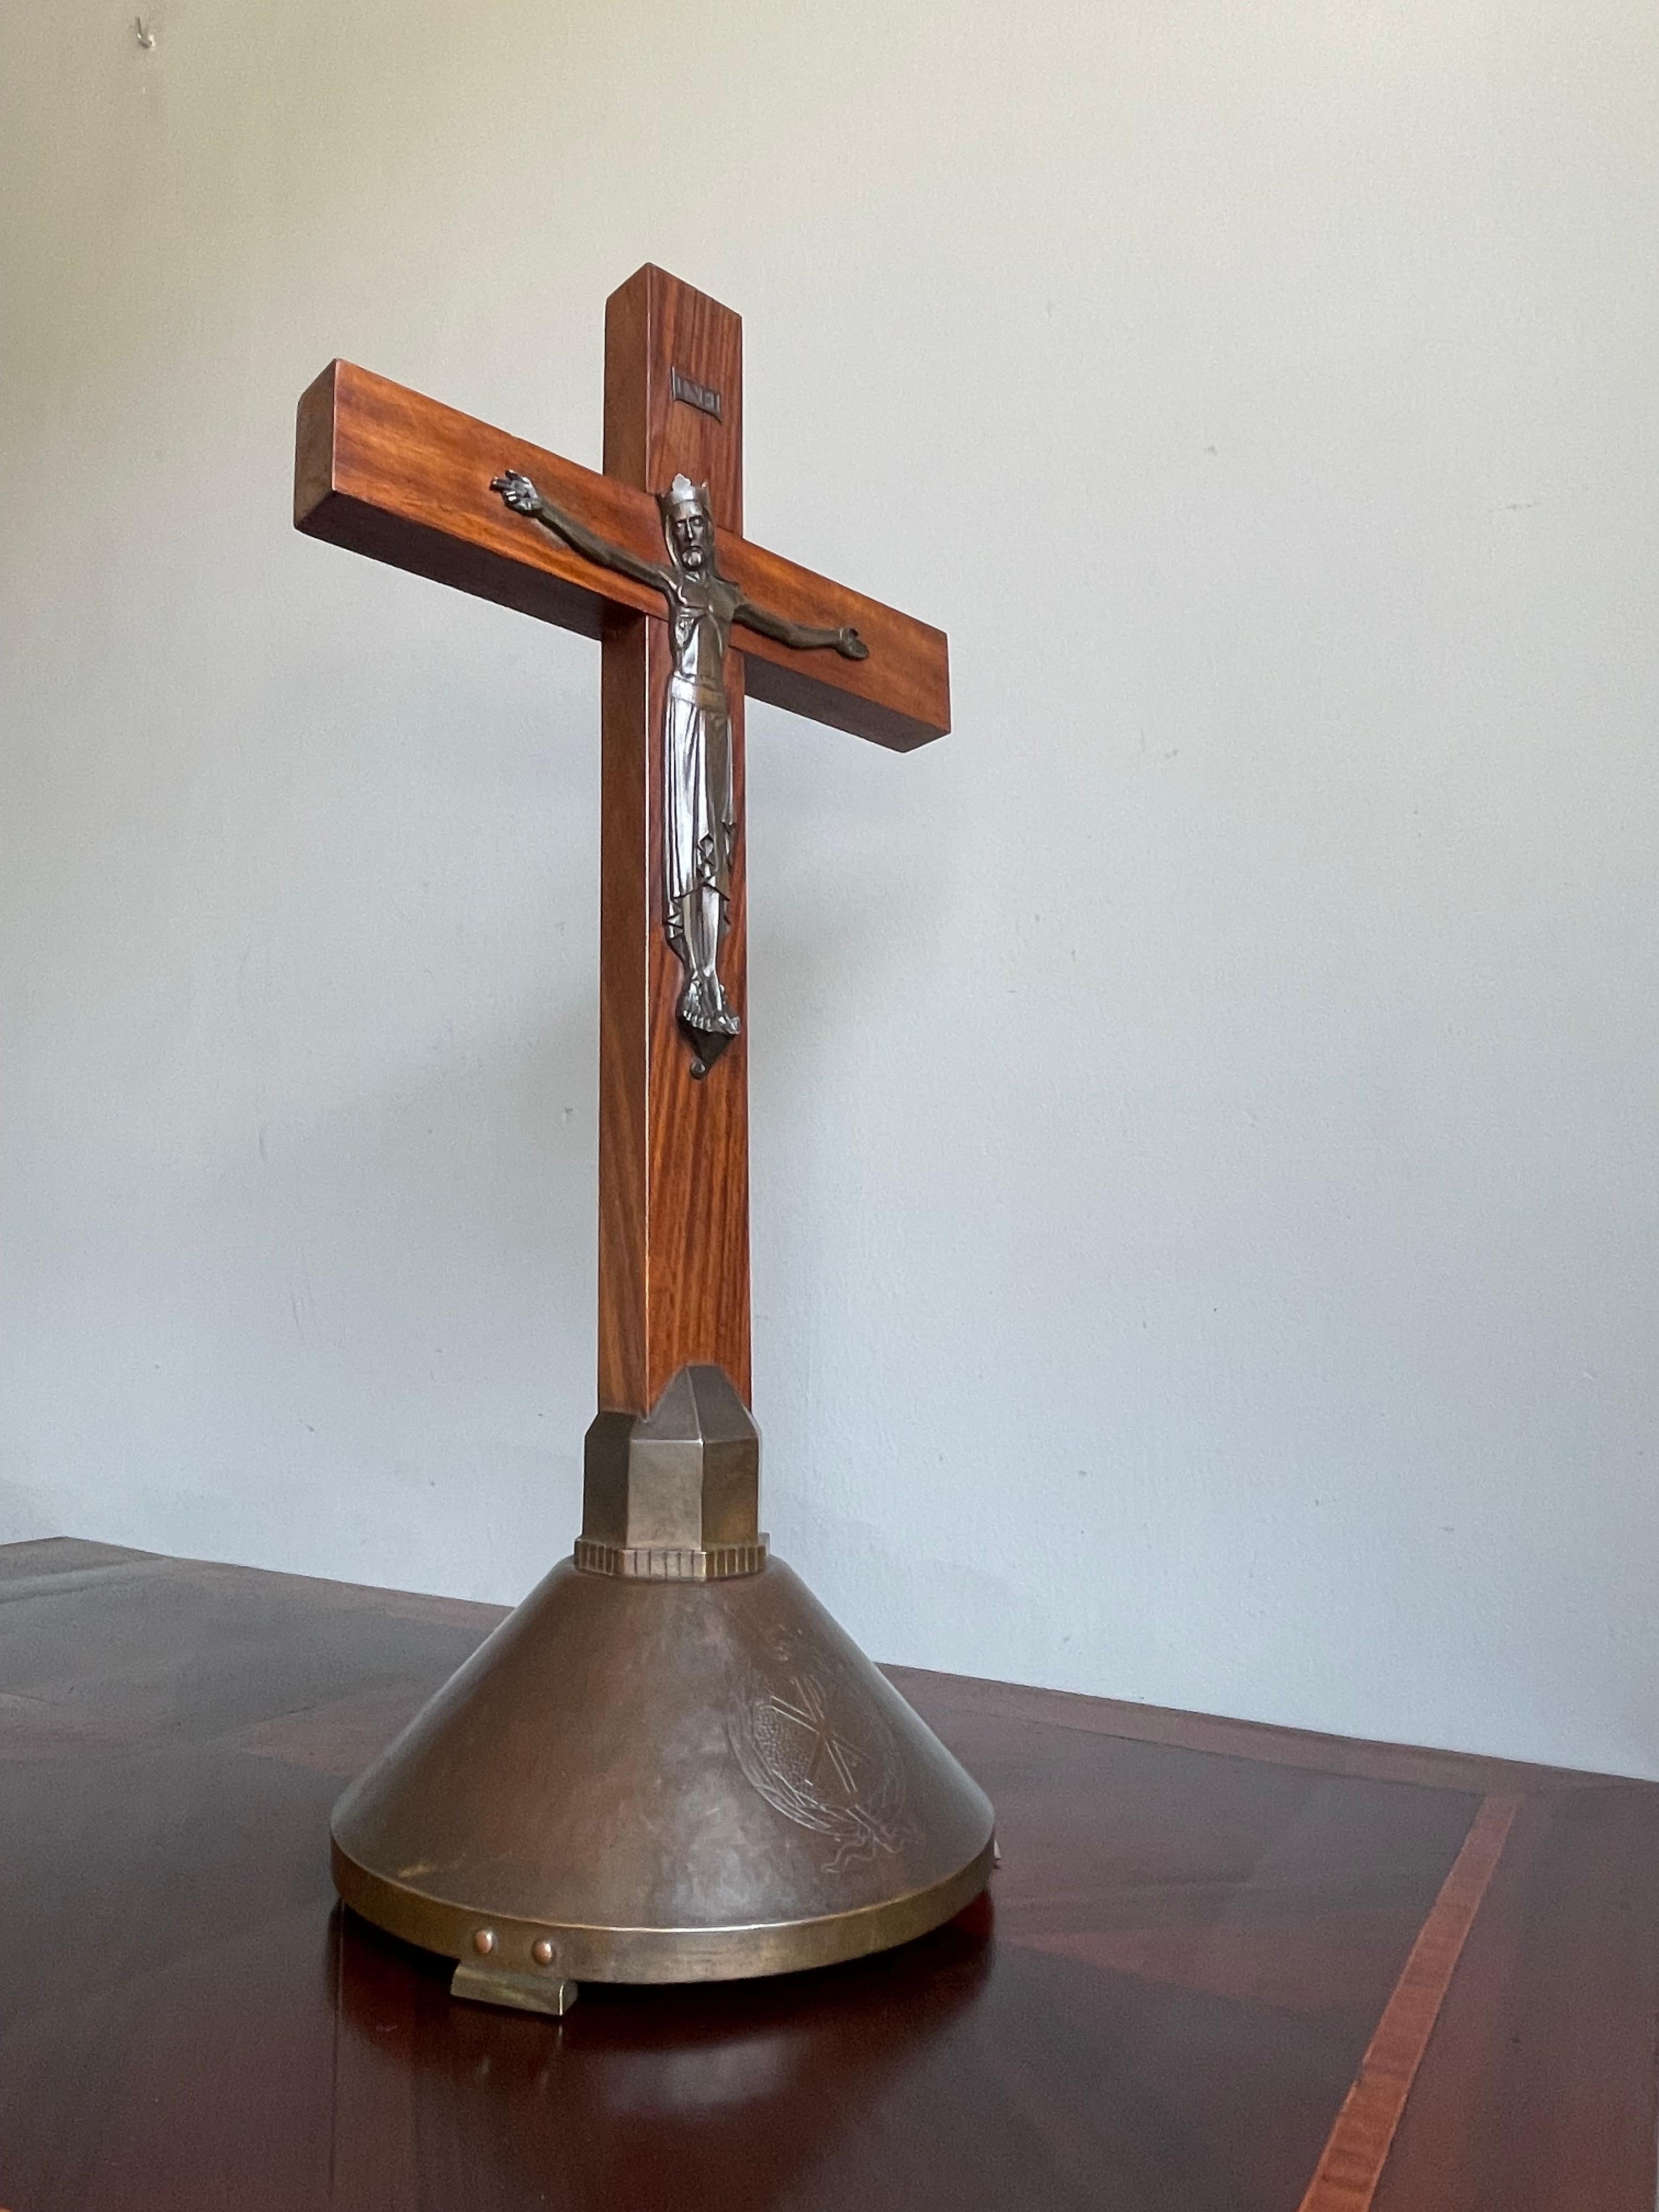 Marked altar crucifix with a brass base with Christogram and a bronze corpus with a Gothic crown.

For us the most powerful statement will always be 'the truth will set you free'. It is what we have learned most from the life of Christ and of His